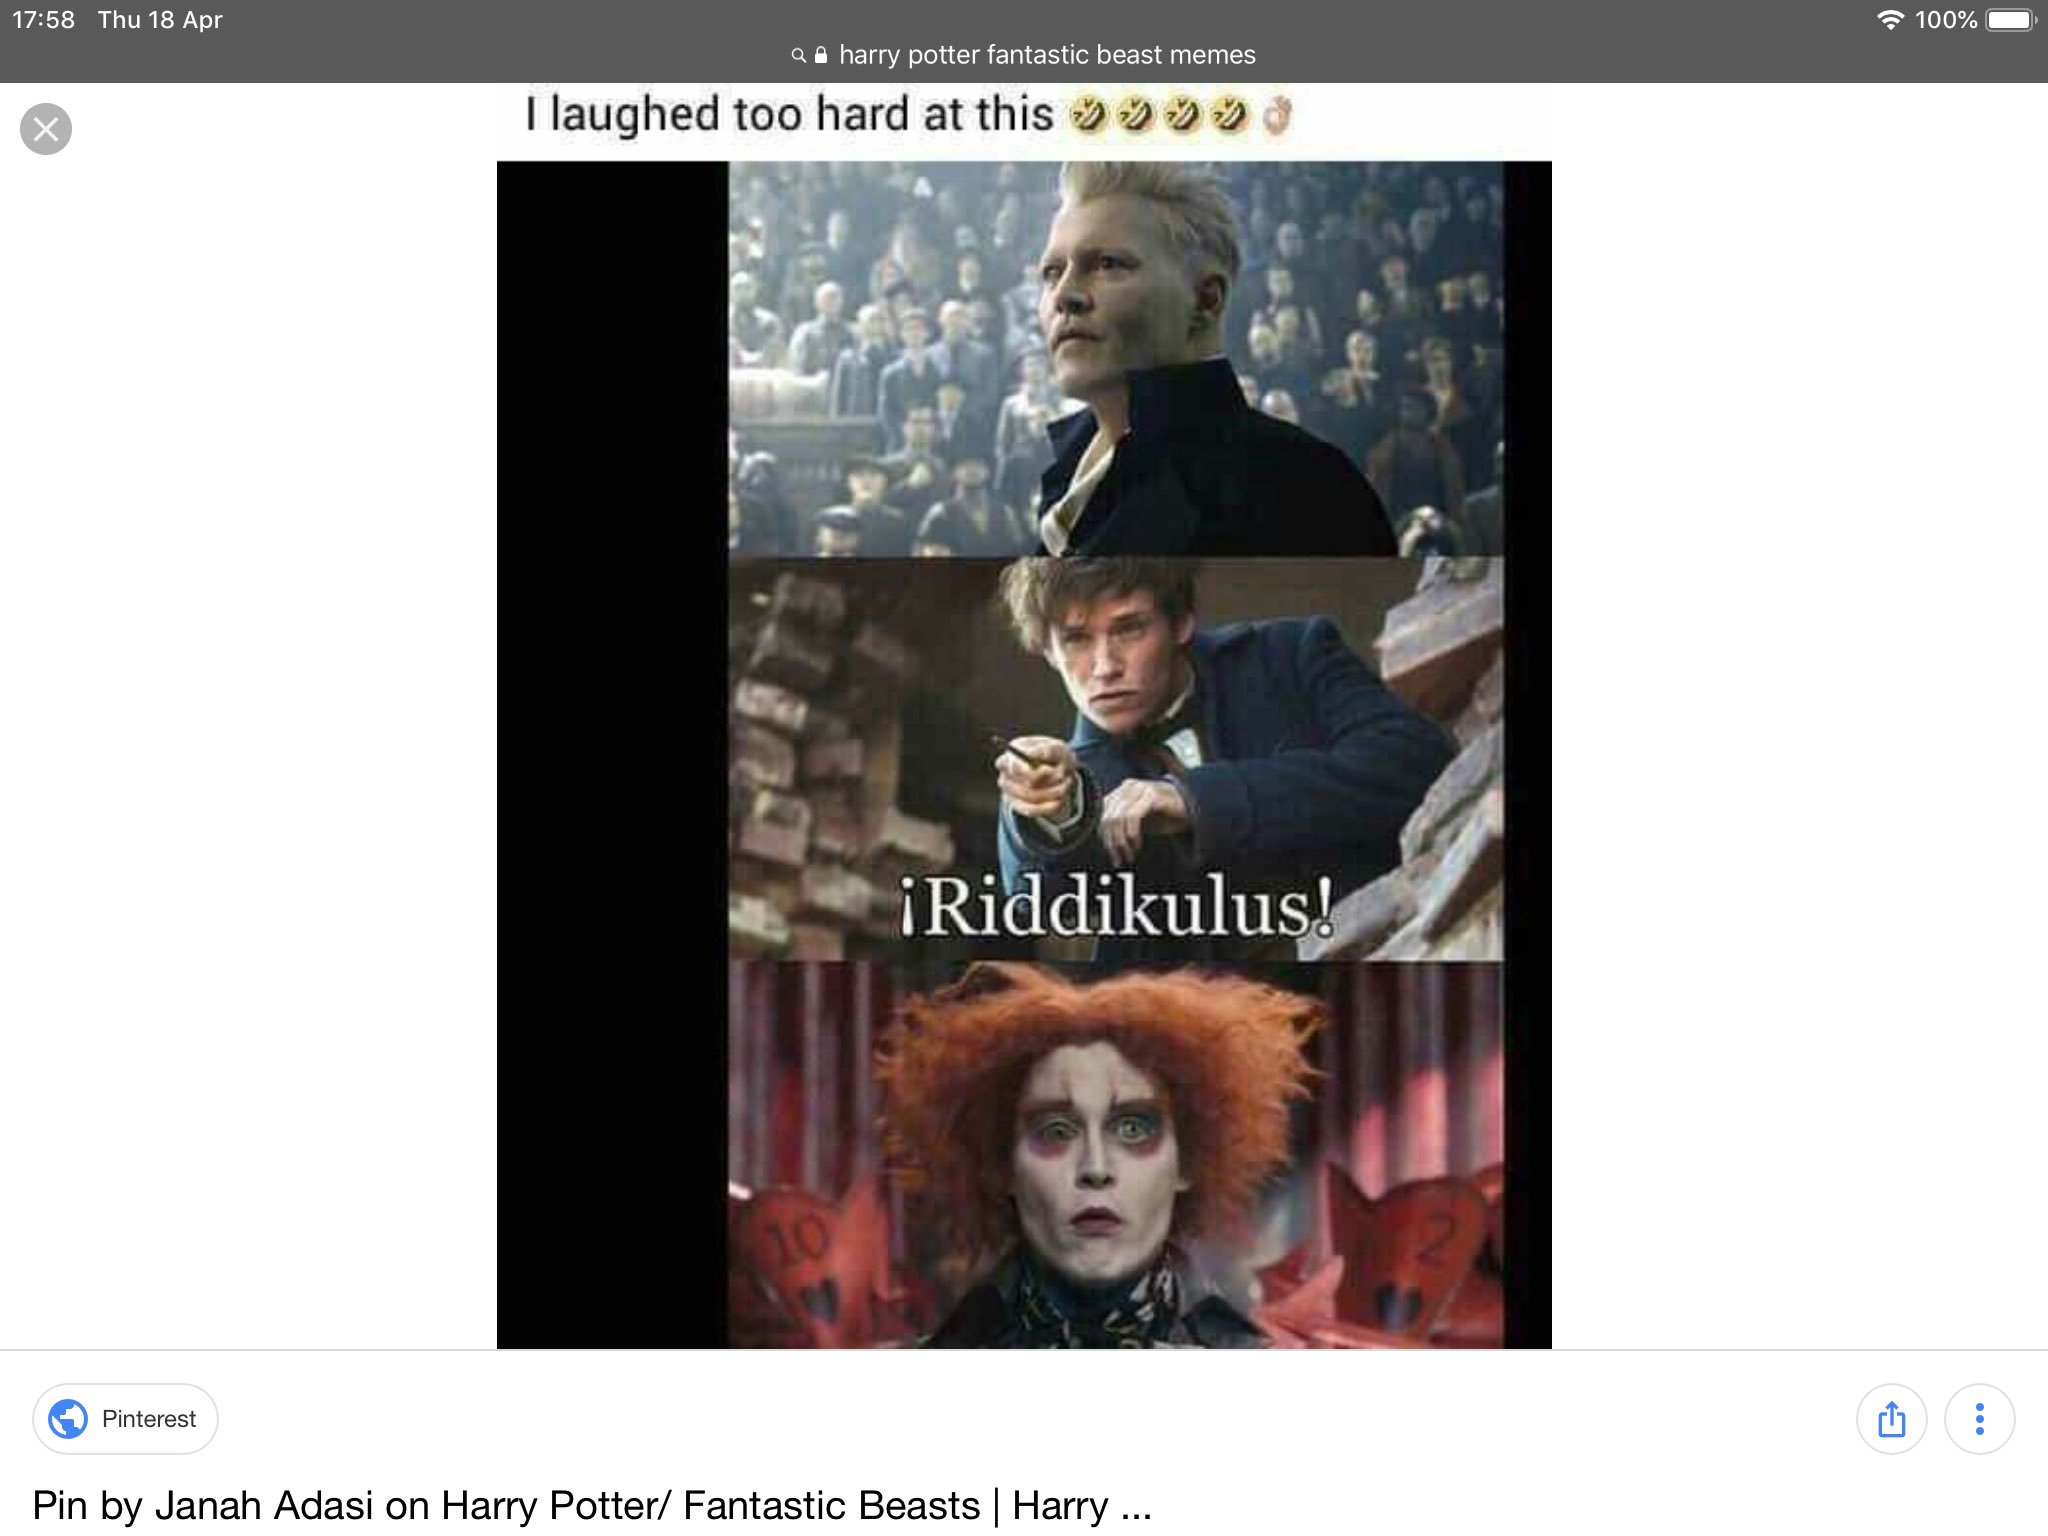 Harry Potter memes 👌😂 Follow for more magical and relatable content  Via @potterwiki_ #harrypotter #hogwartshouses #gryffindor…